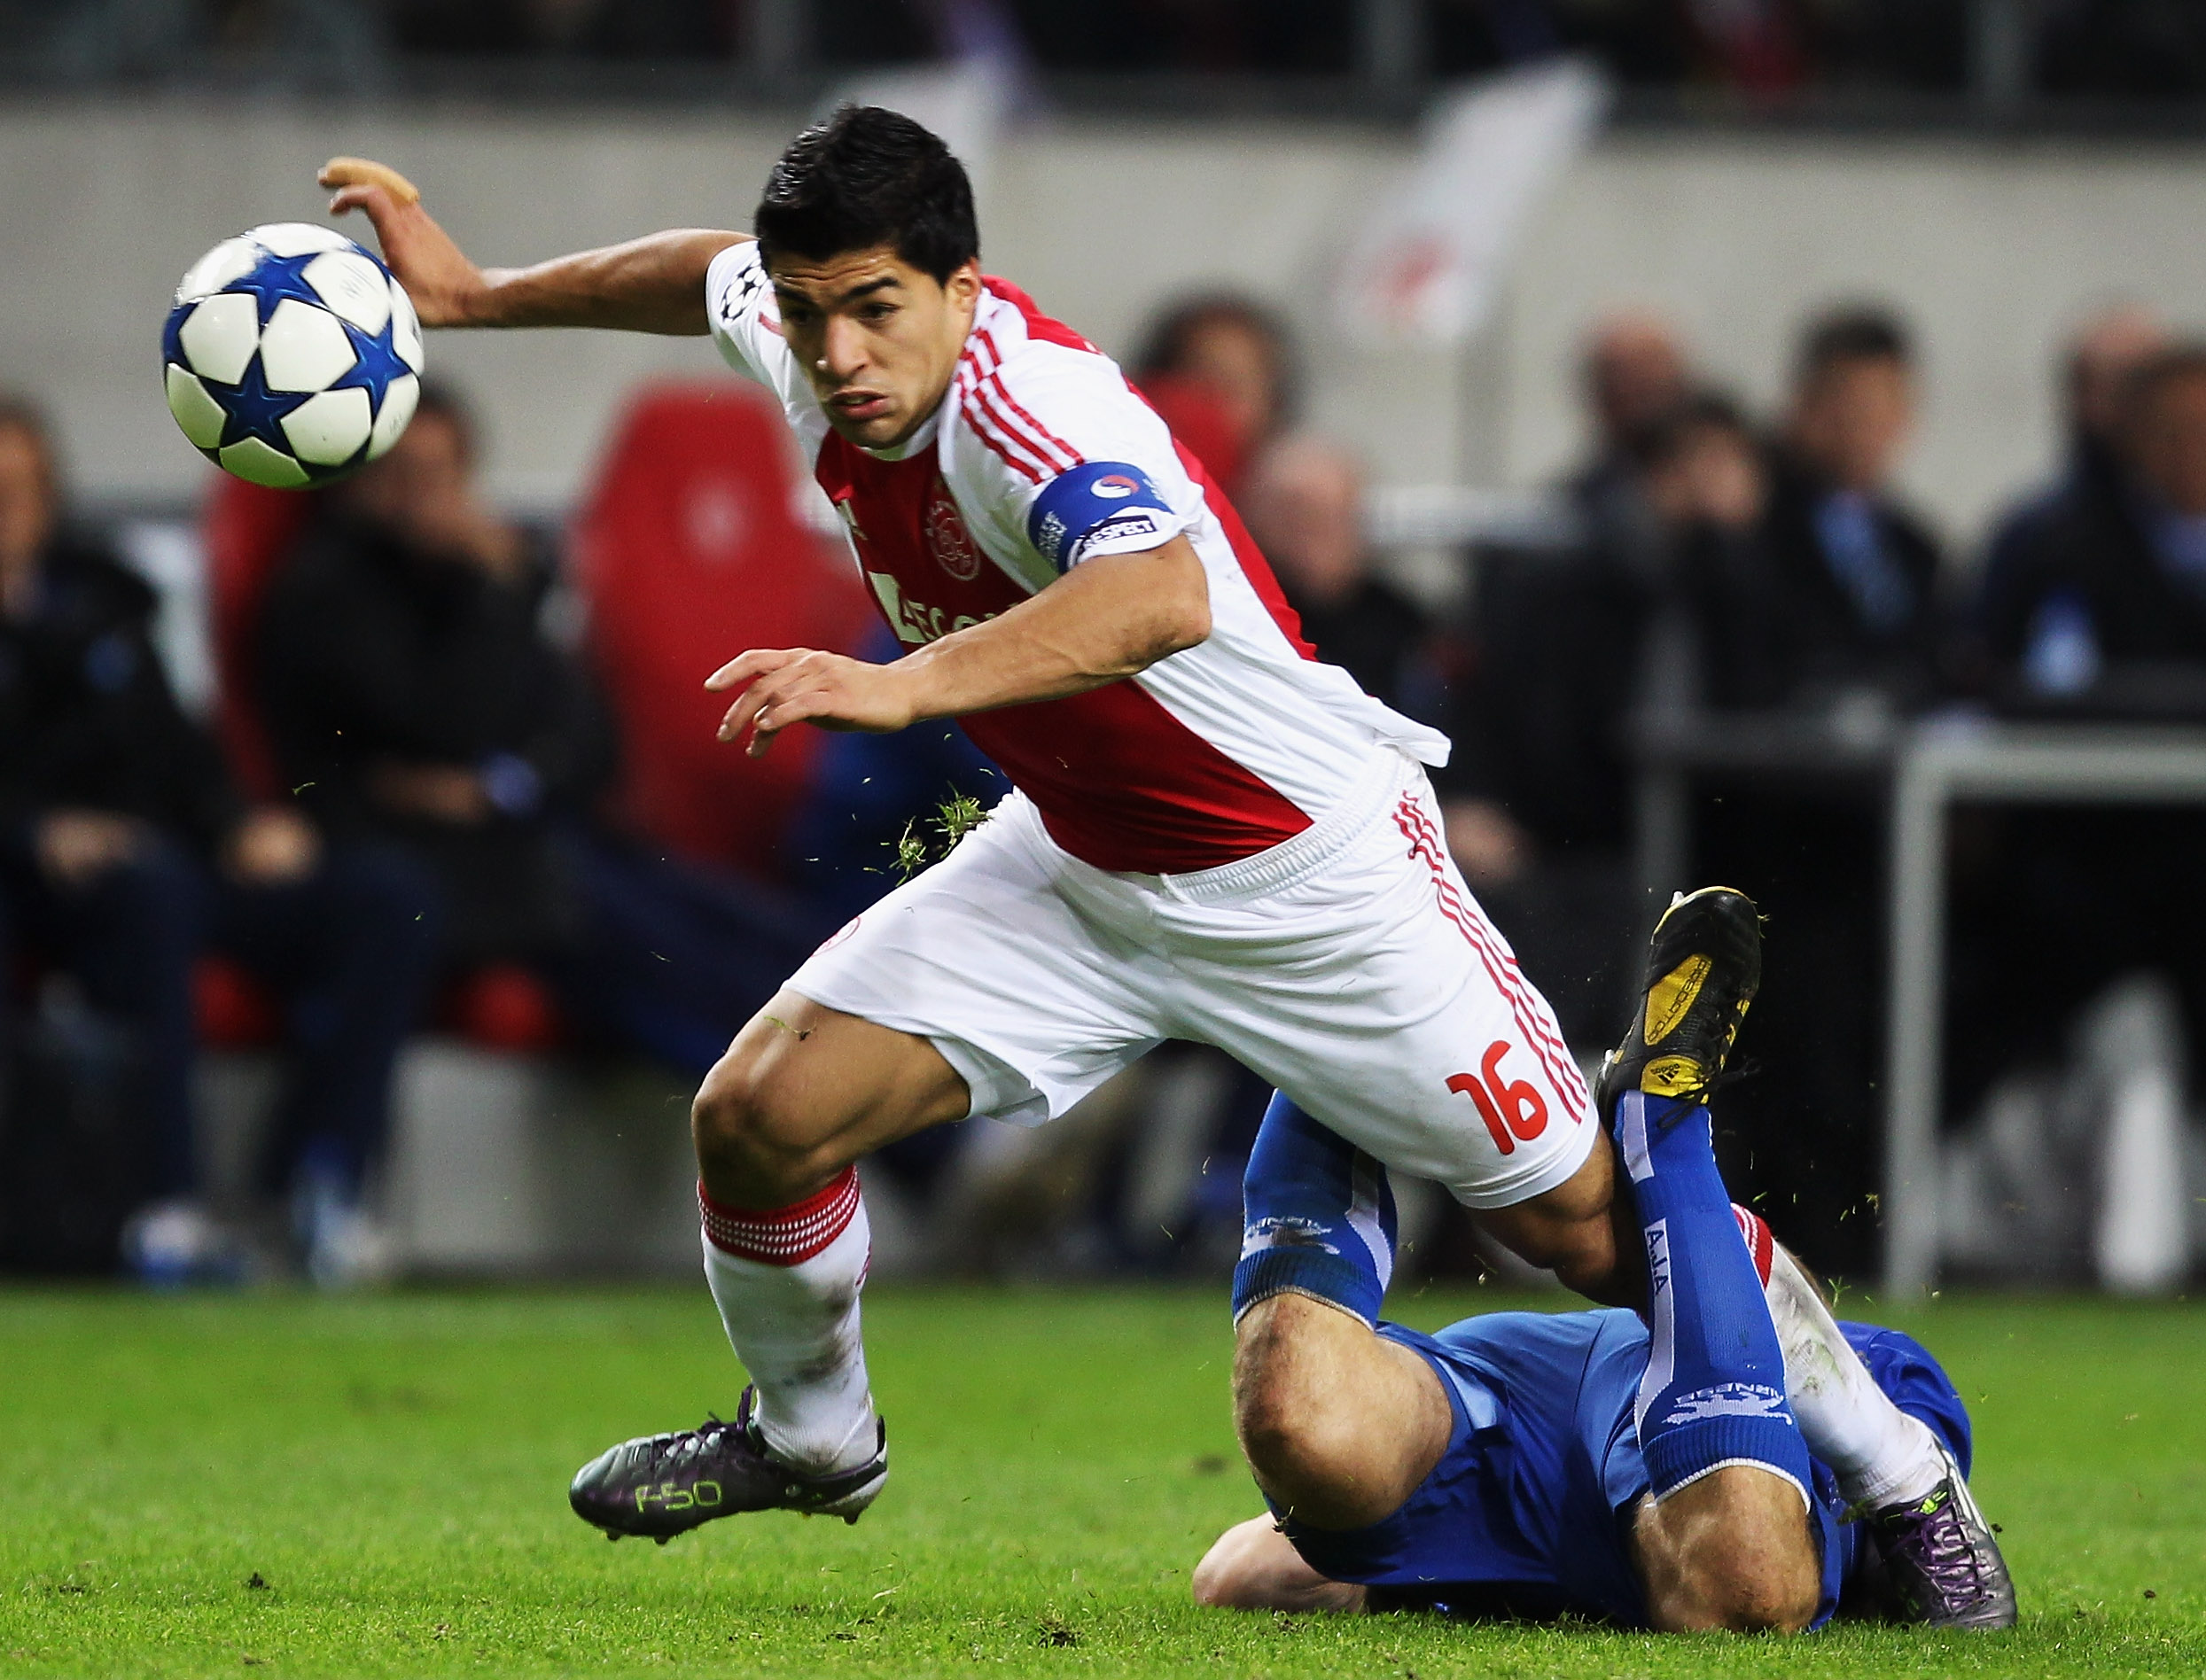 AMSTERDAM, NETHERLANDS - OCTOBER 19:  Luis Suarez of AFC Ajax steps over Stephane Grichting of AJ Auxerre during the UEFA Champions League Group G match between AFC Ajax and AJ Auxerre at the Amsterdam ArenA on October 19, 2010 in Amsterdam, Netherlands.